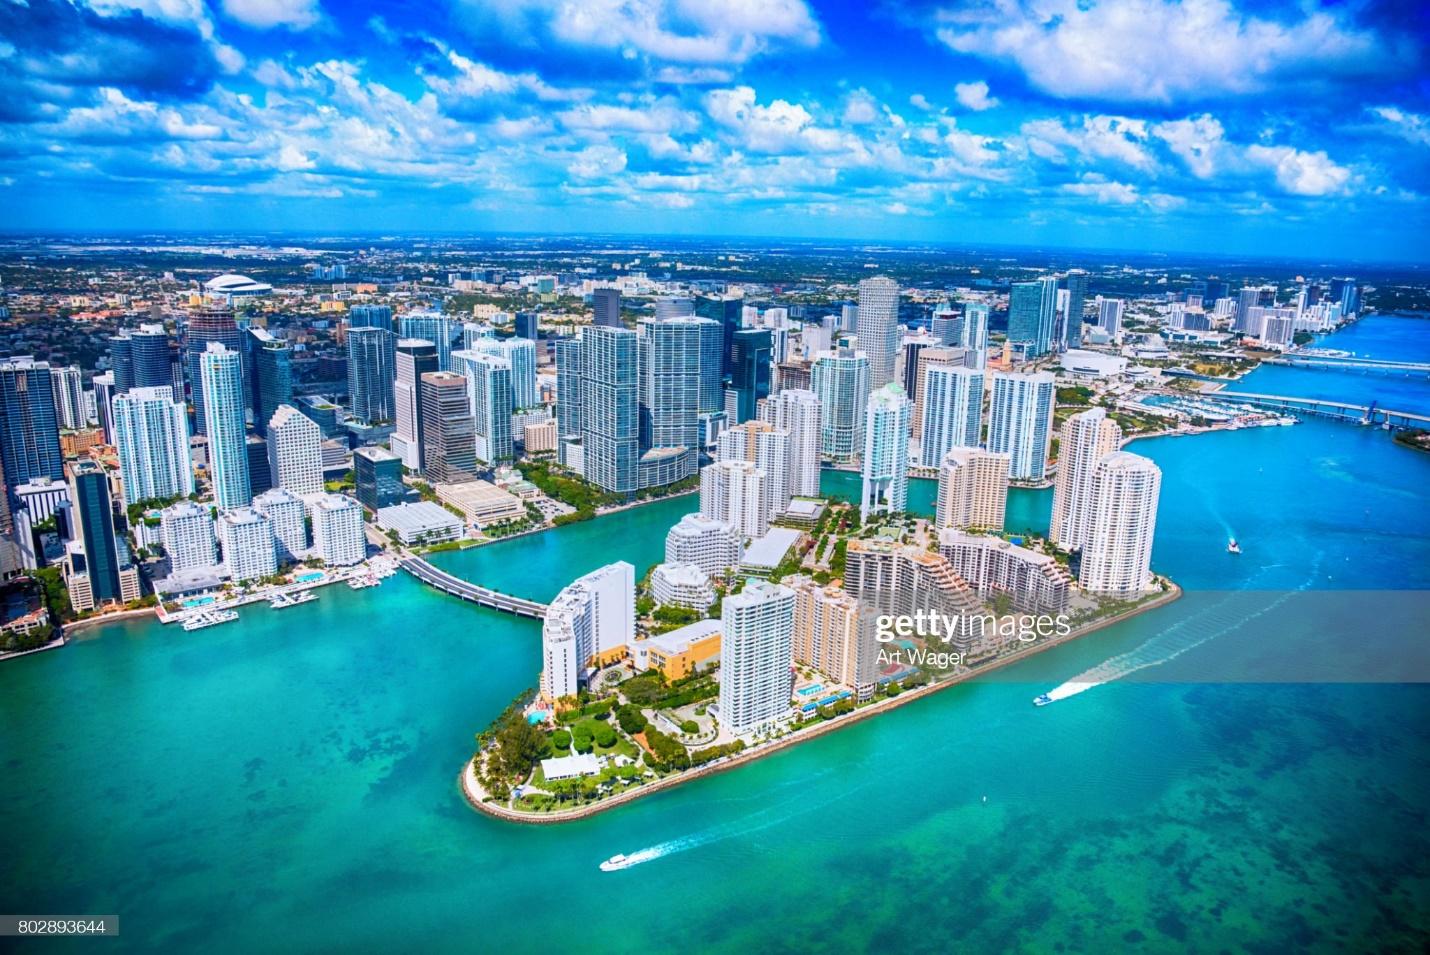 C:\Users\Valerio\Desktop\New folder\aerial-view-of-downtown-miami-florida-picture-id802893644.jpg